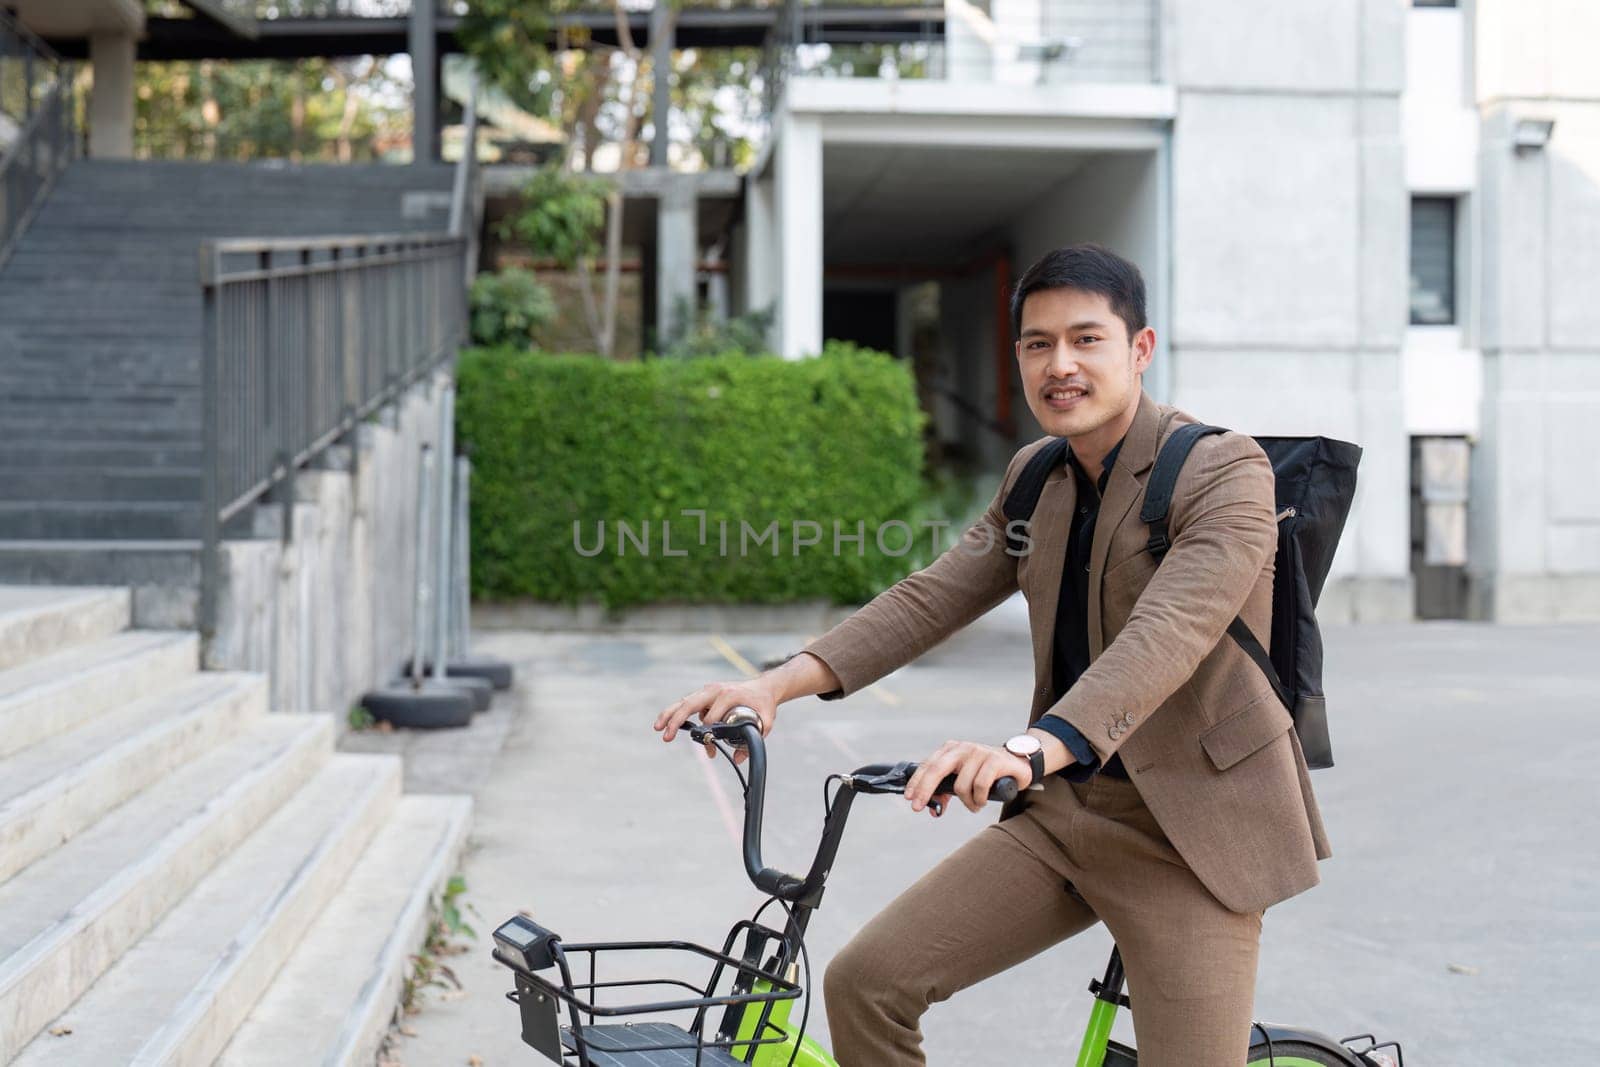 Asian businessman in a suit is riding a bicycle on the city streets for his morning commute to work. Eco transportation concept, sustainable lifestyle concept.